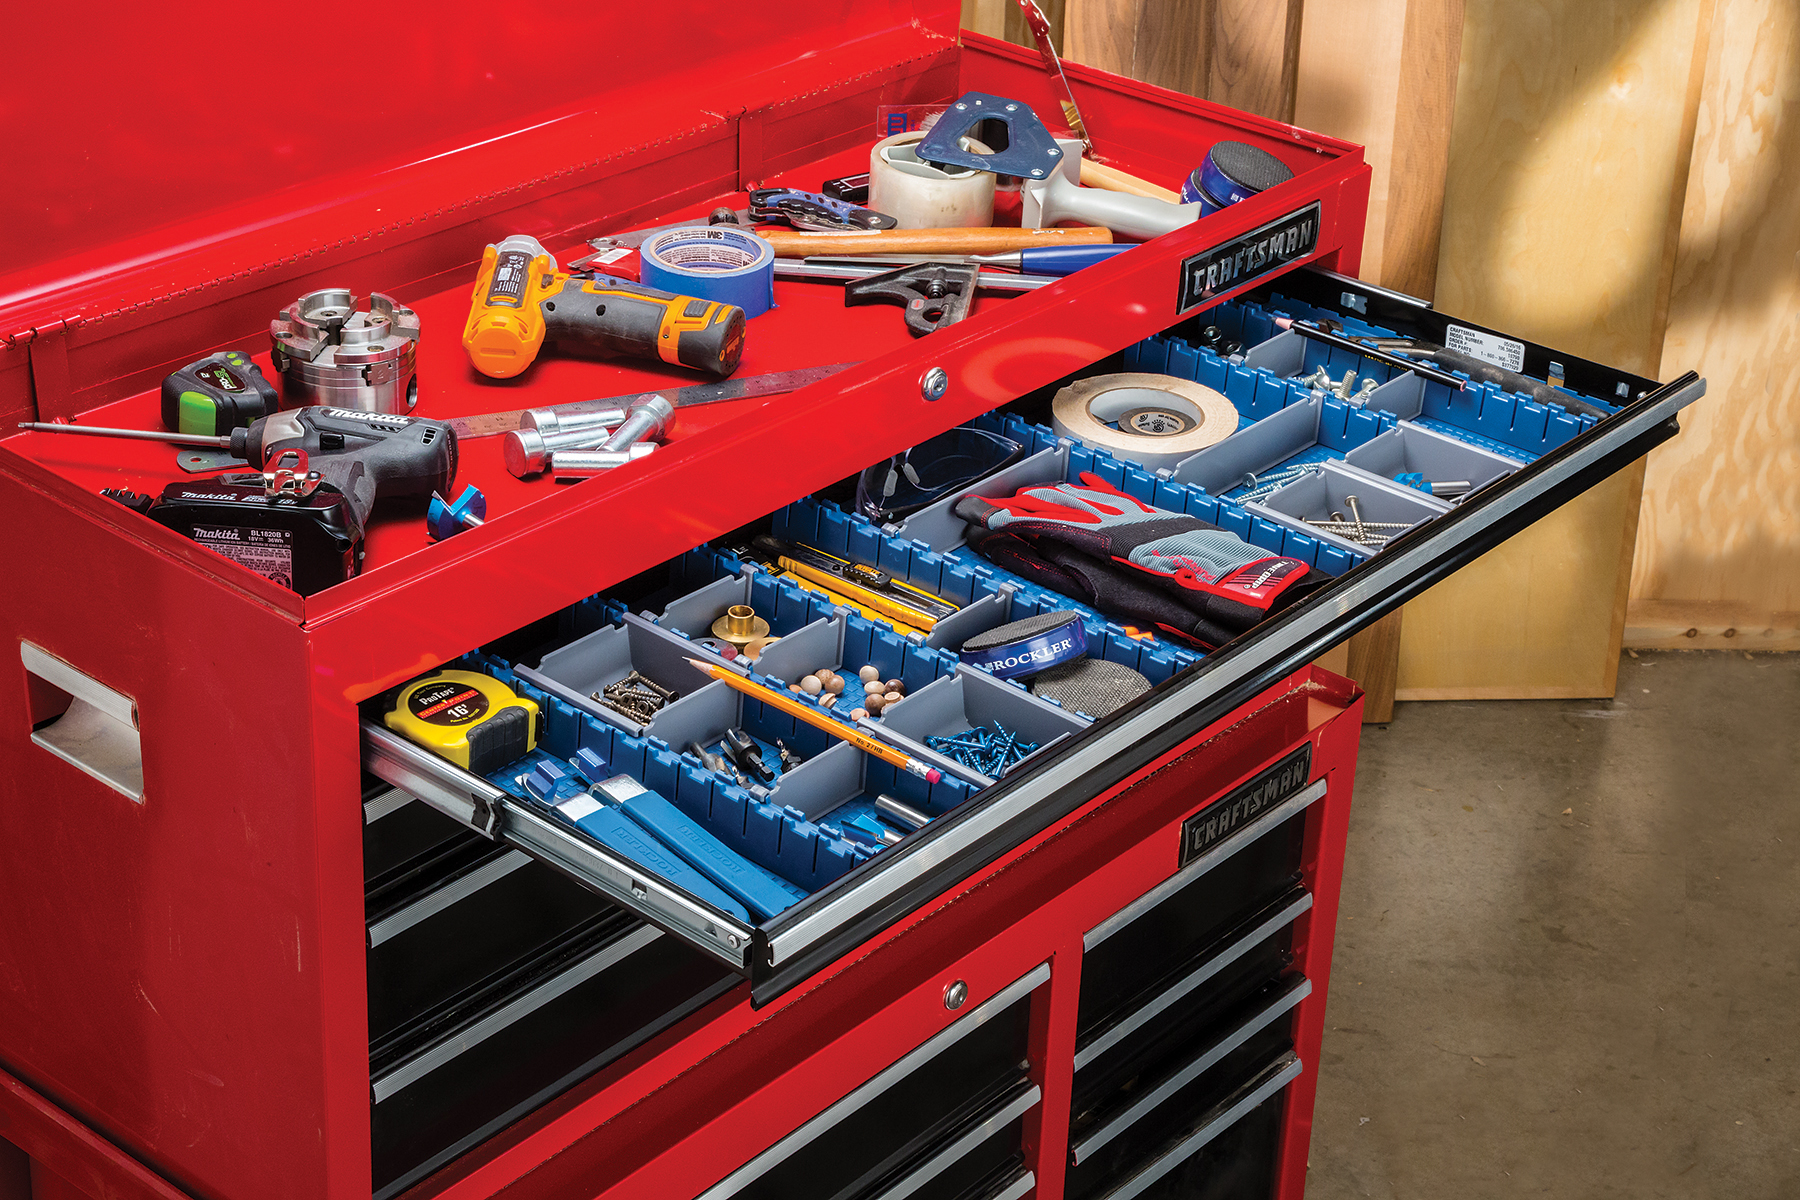 Arrange tools, nails, screws, dowels, plugs, pencils, drill bits, router bits and much more